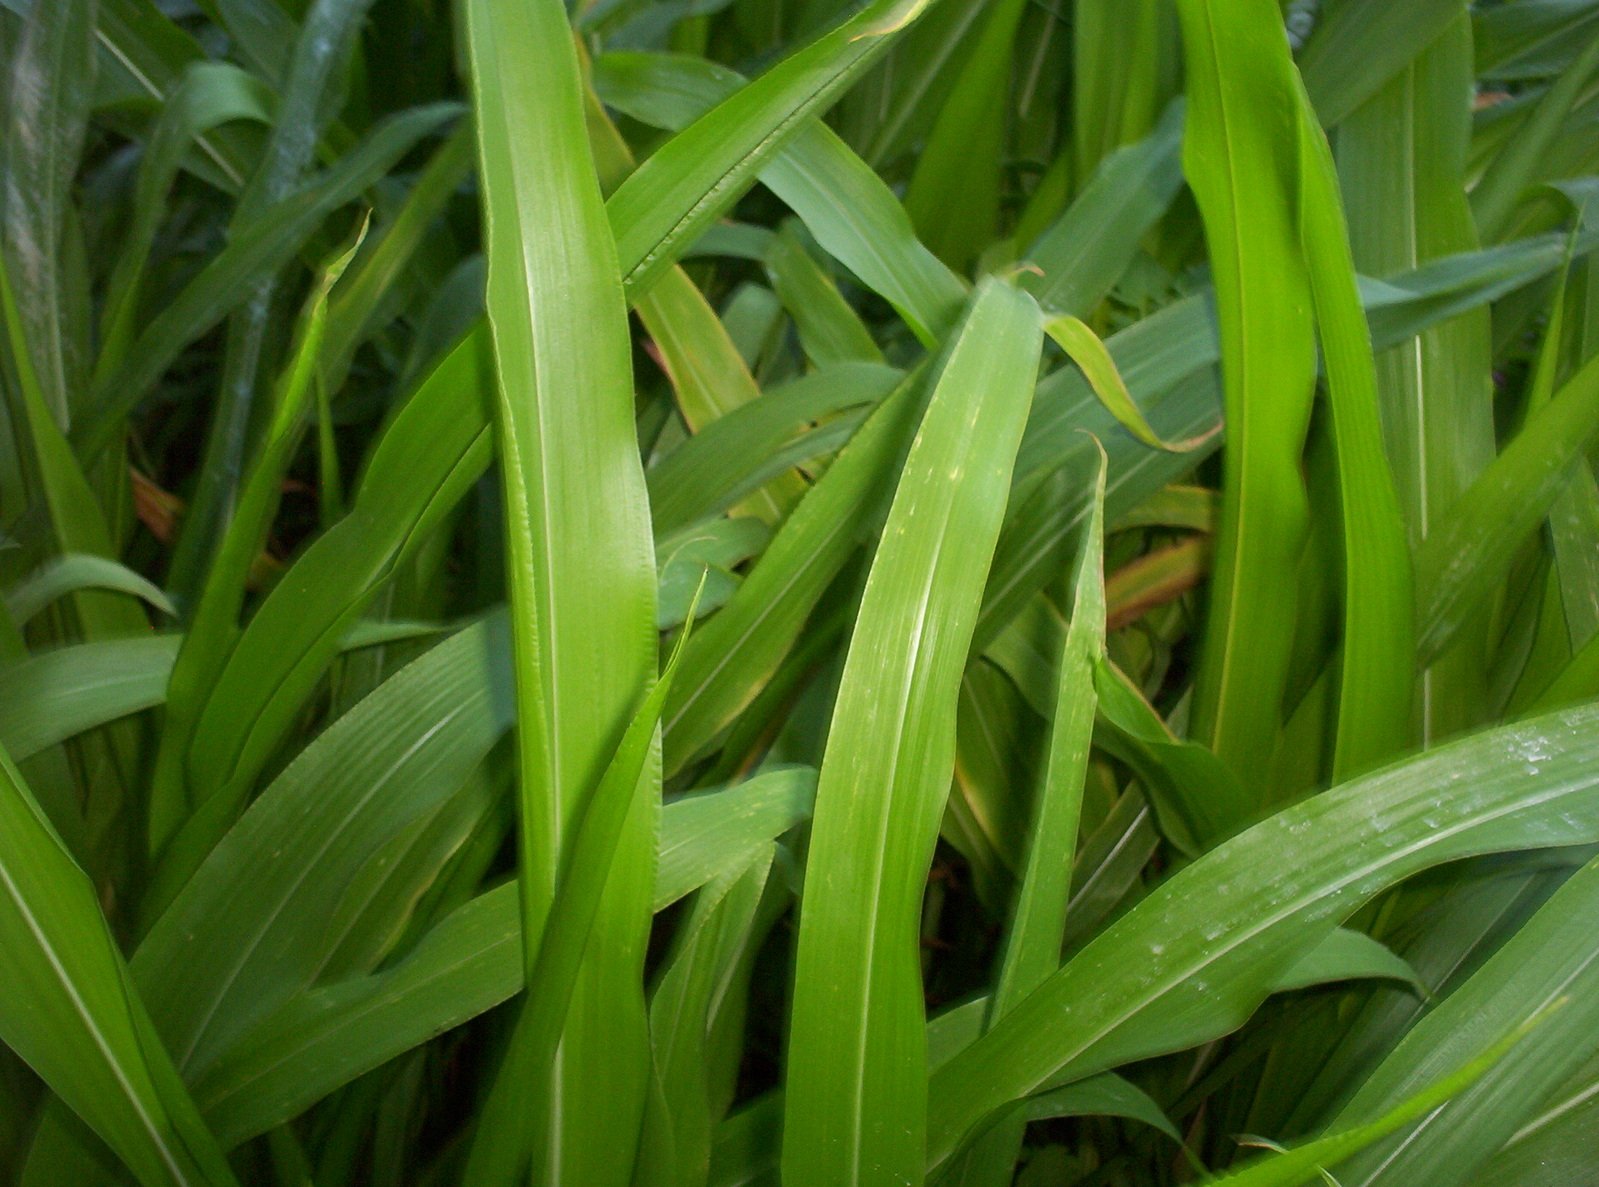 the grass that is tall has many stems